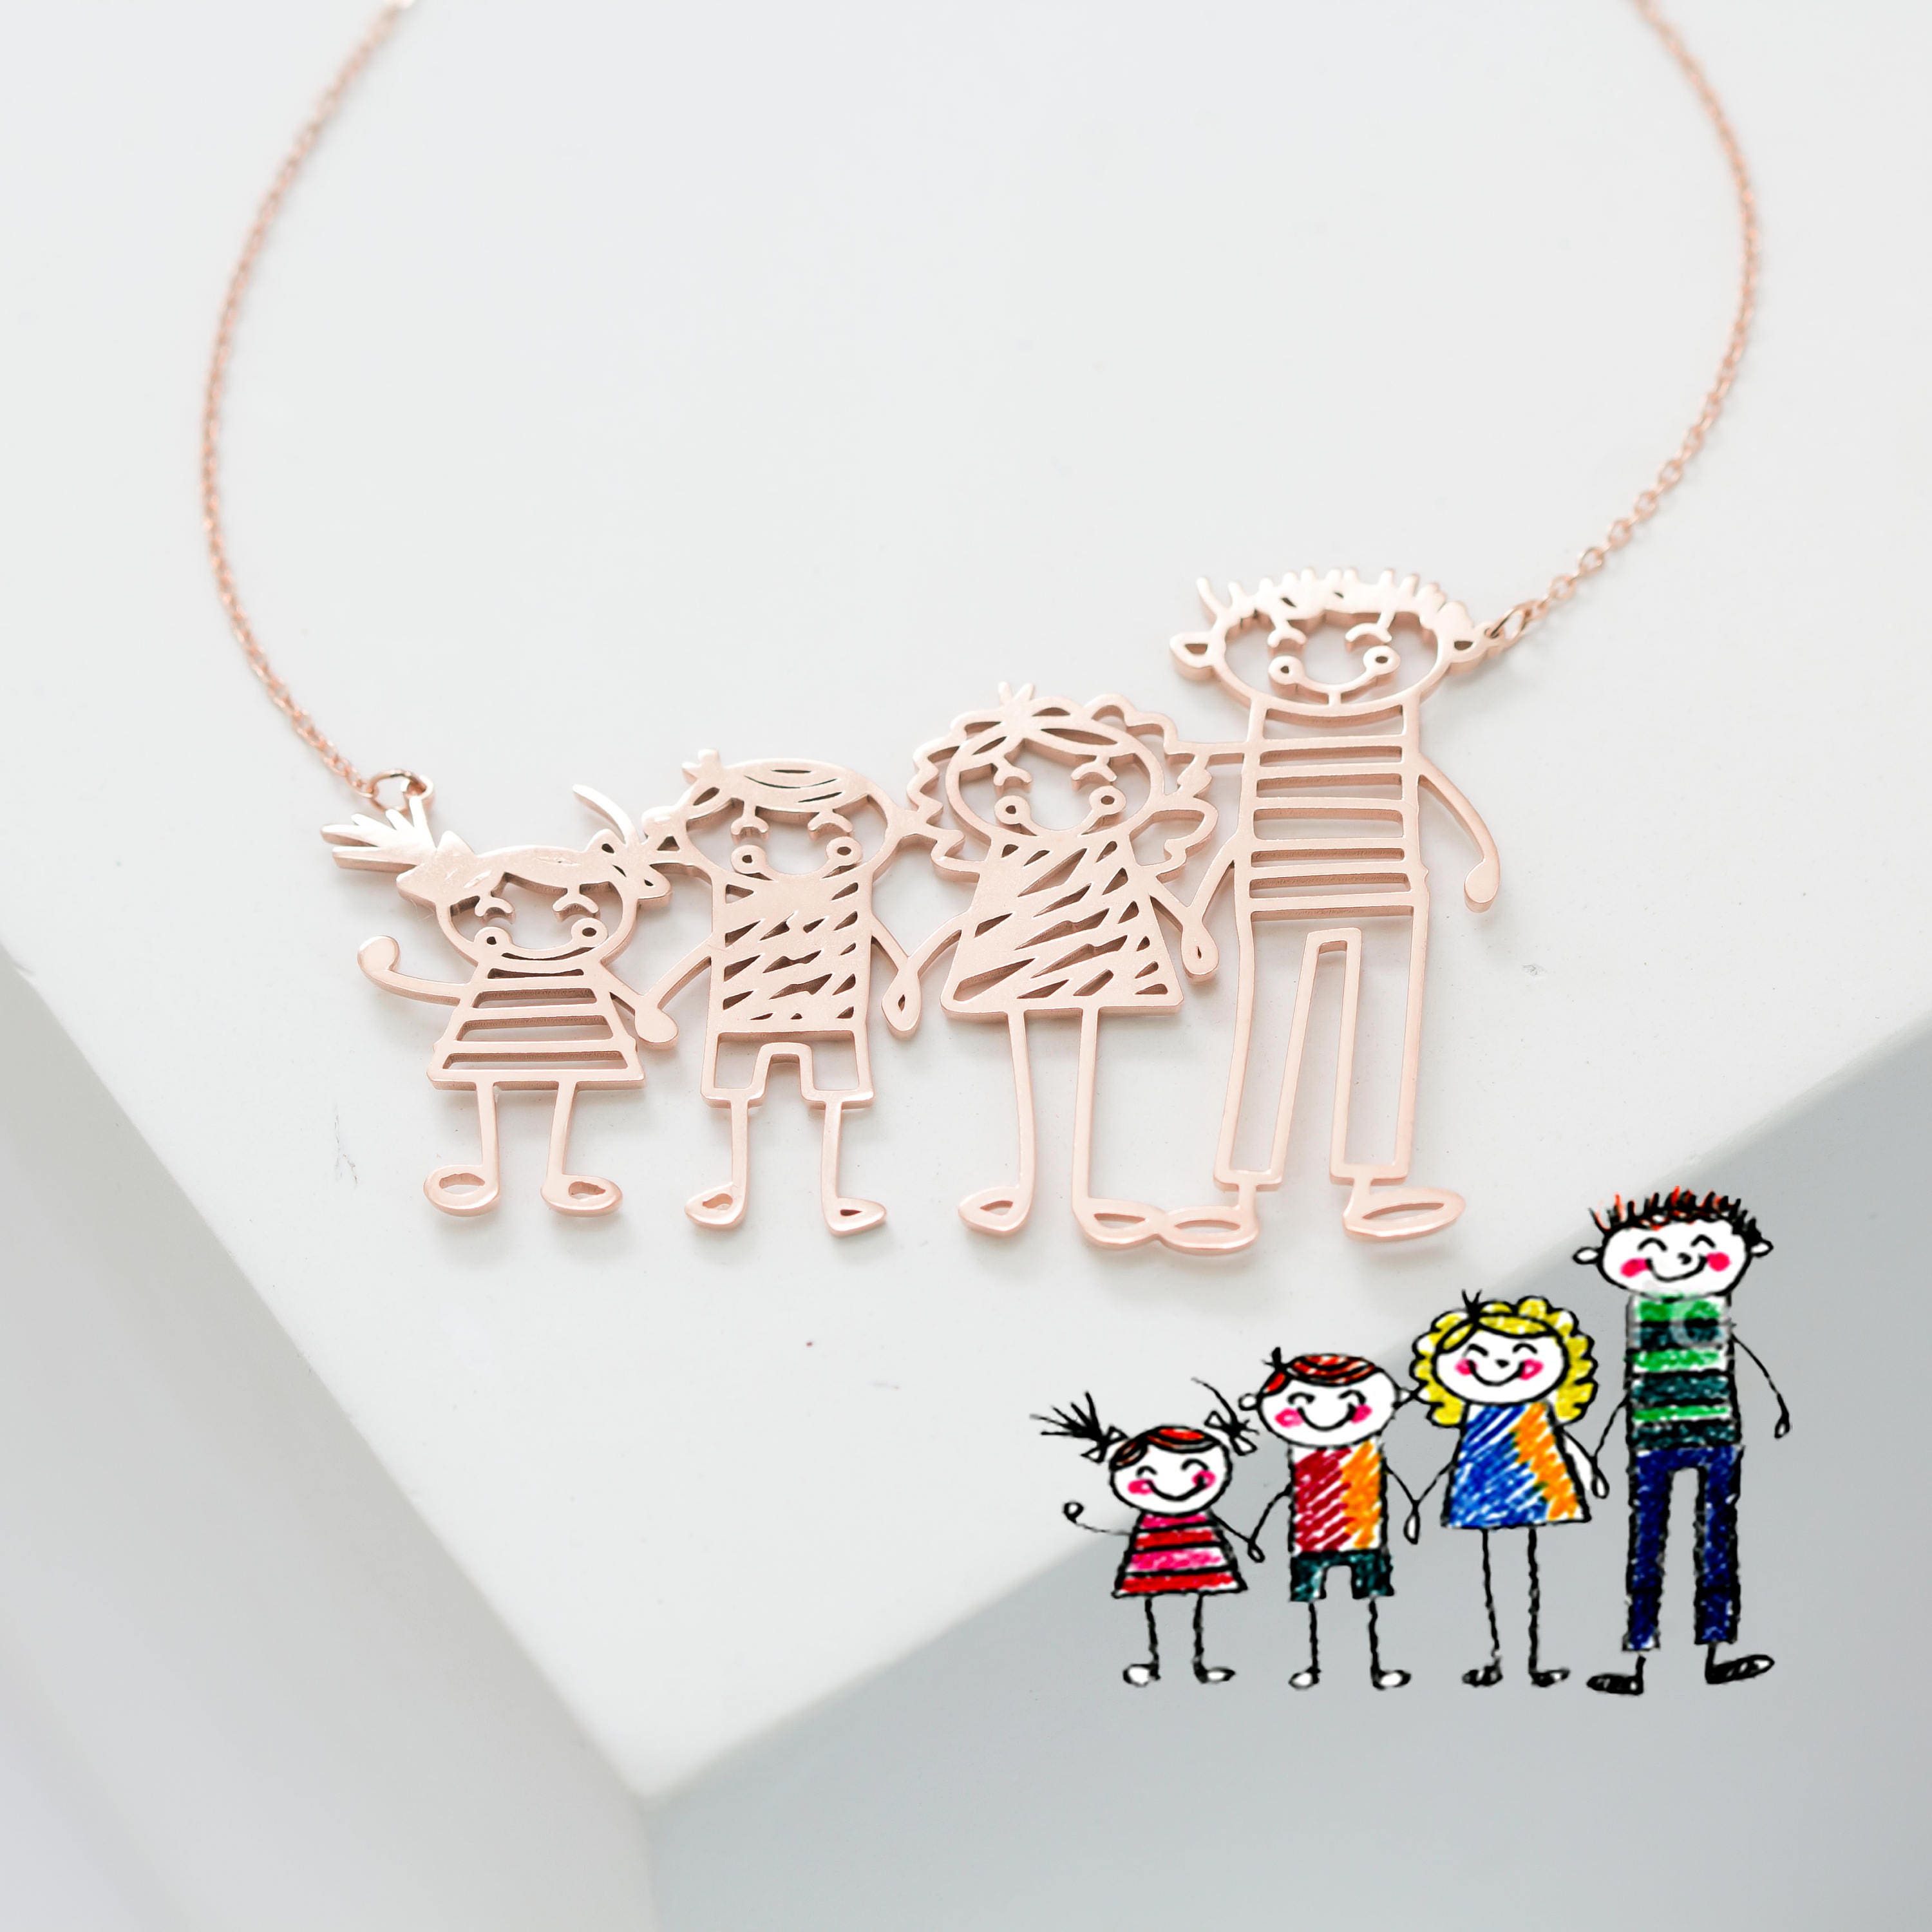 Actual Kids Drawing Necklace • Children Artwork Necklace •Personalized Necklace